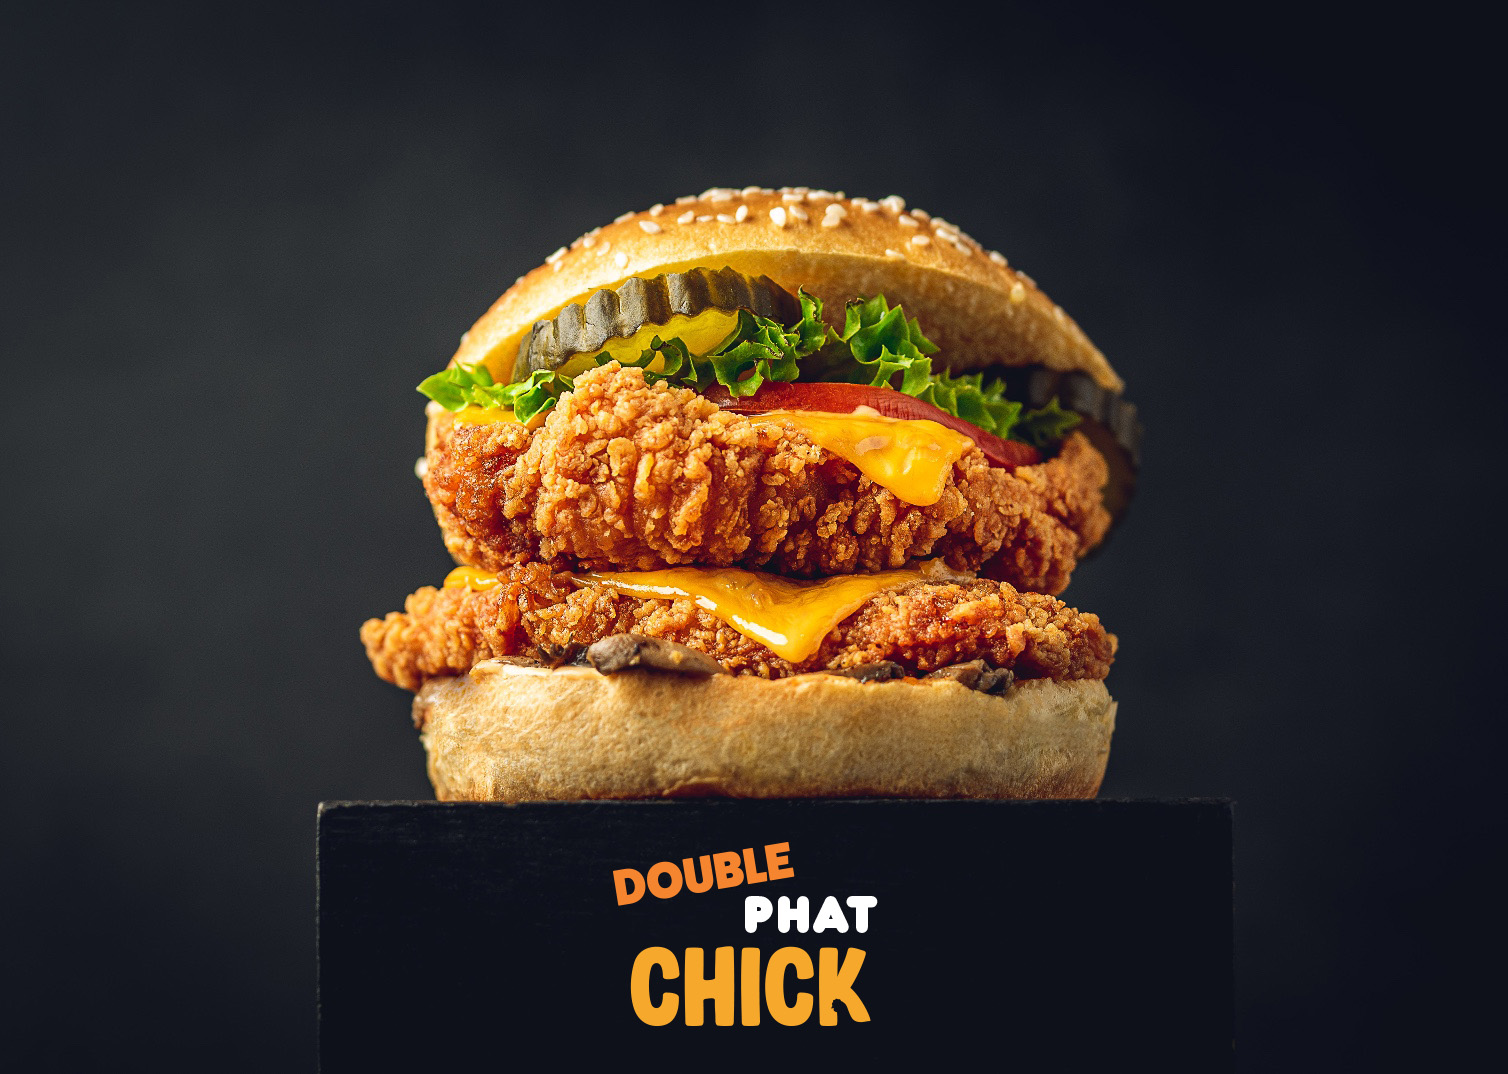 Classic Doble Phat Chick